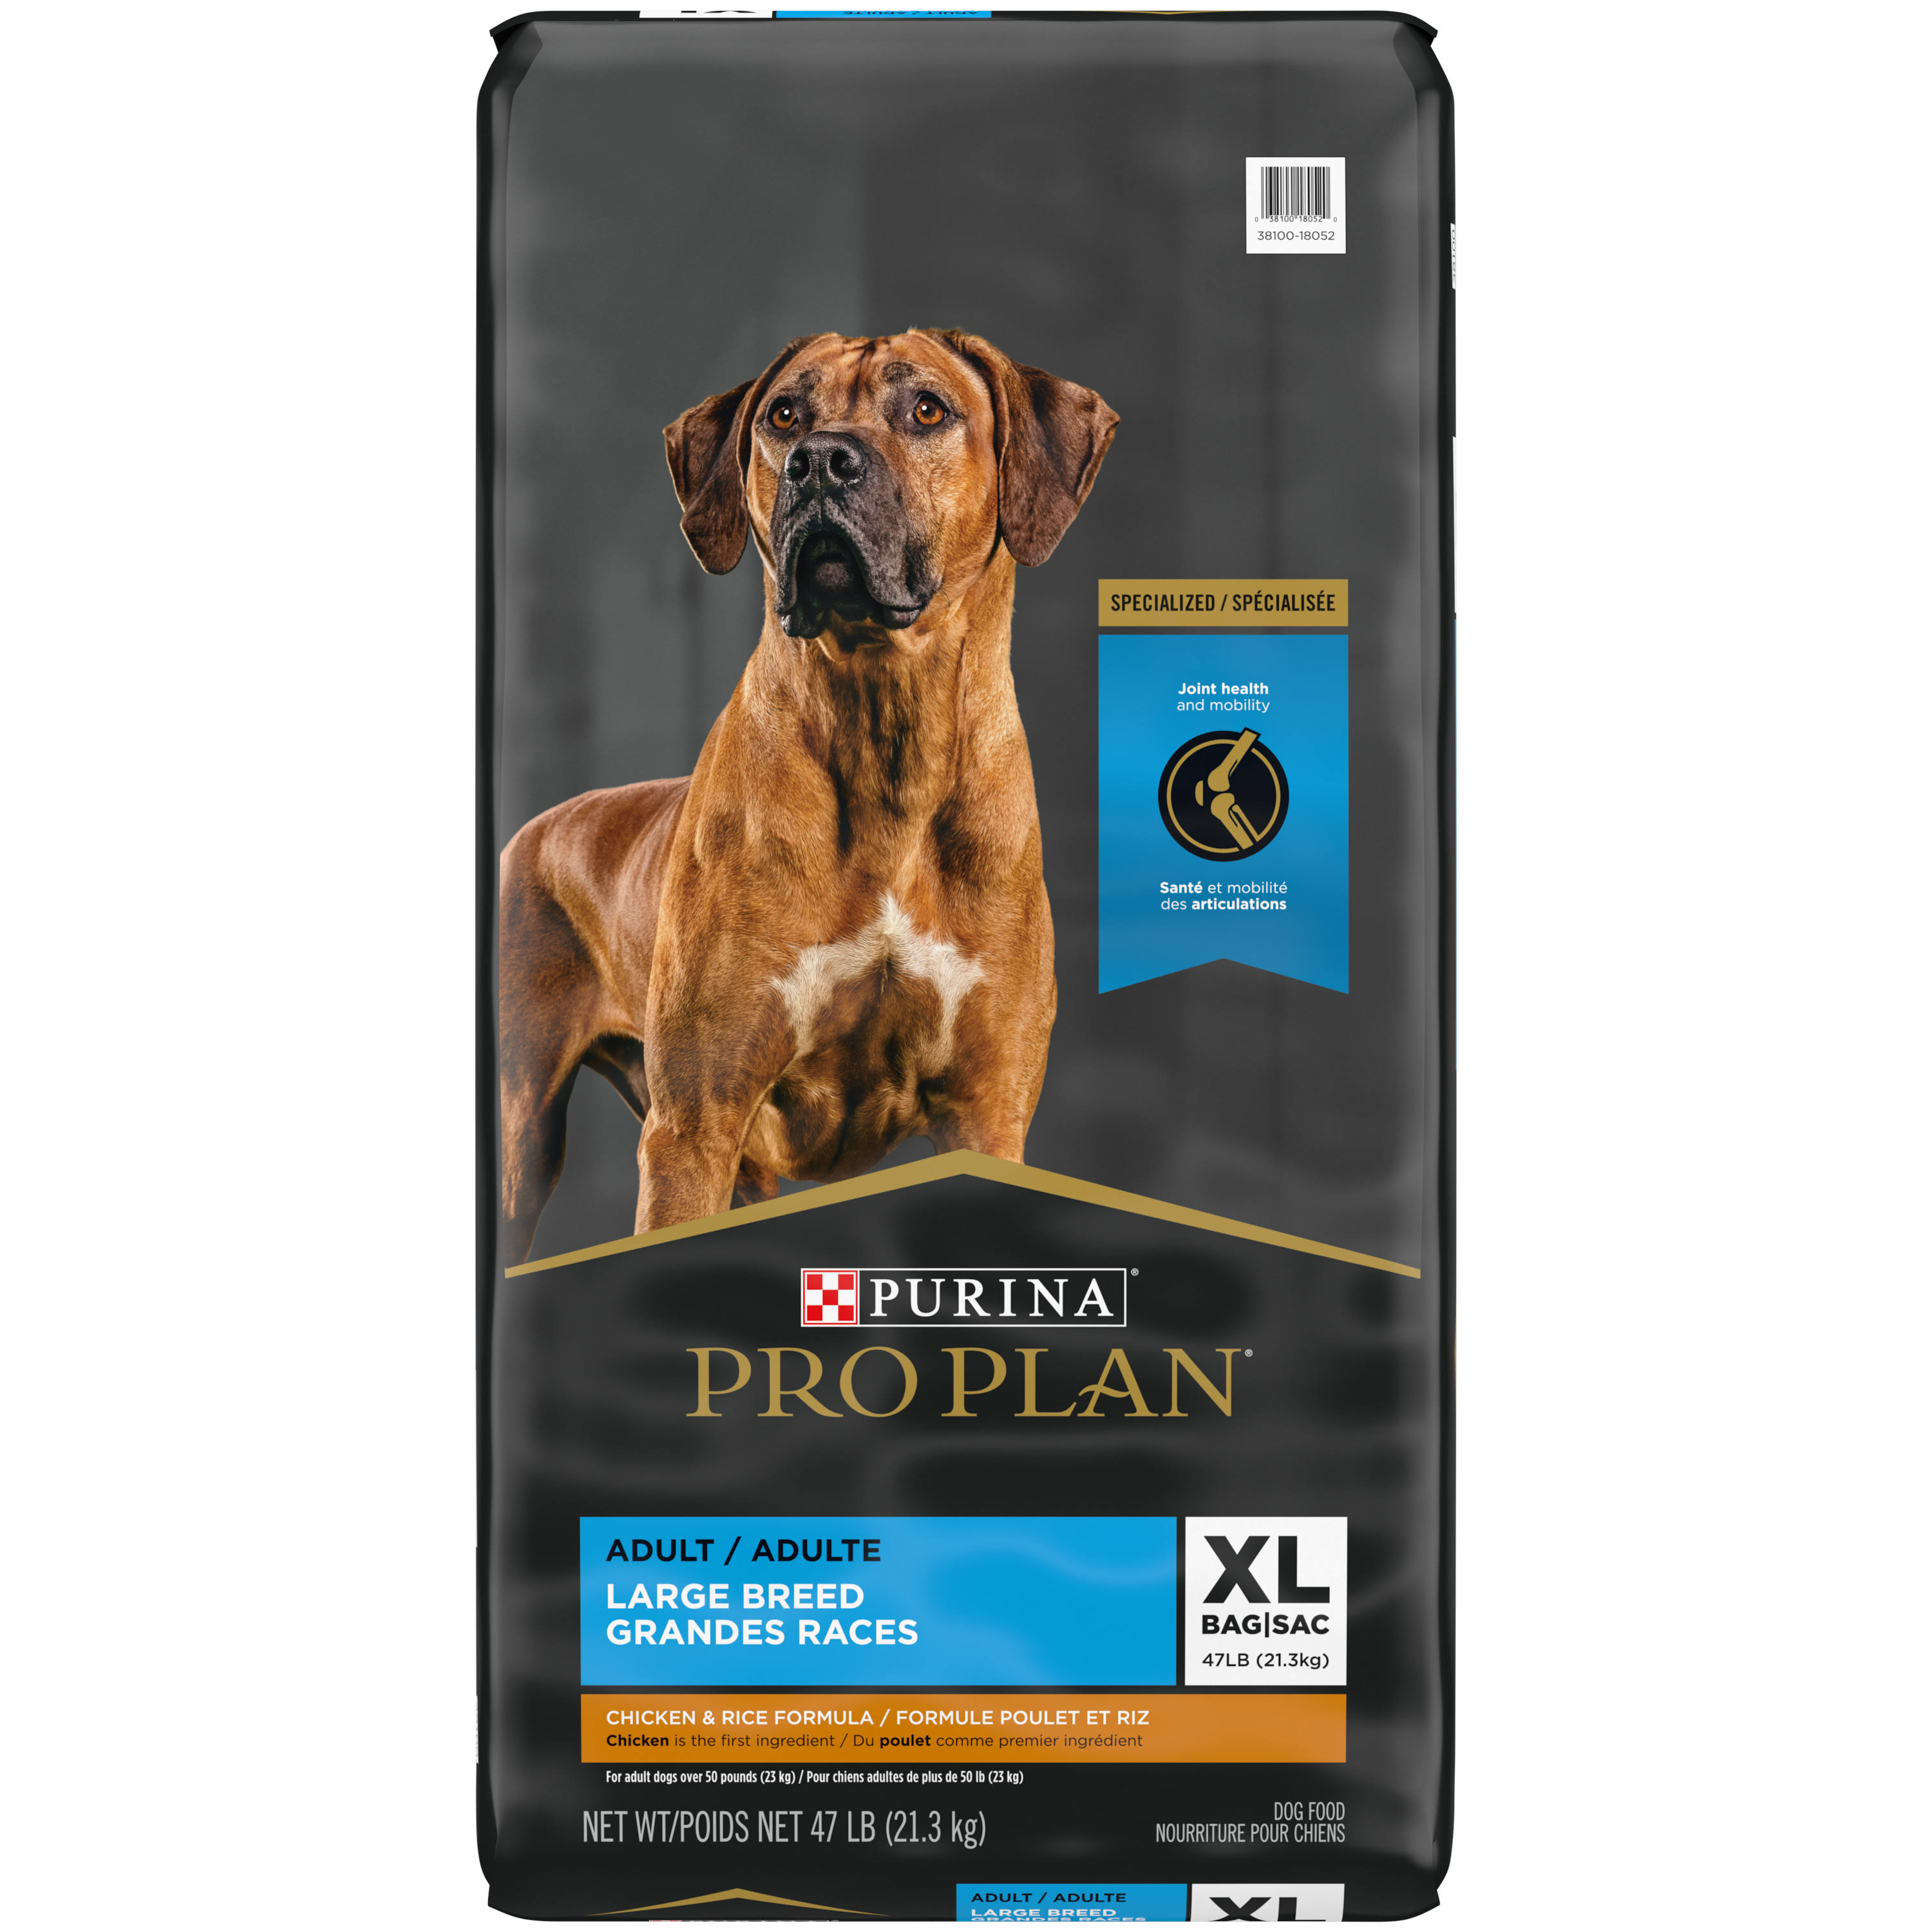 Purina Pro Plan Specialized Large Breed Adult Dog Food